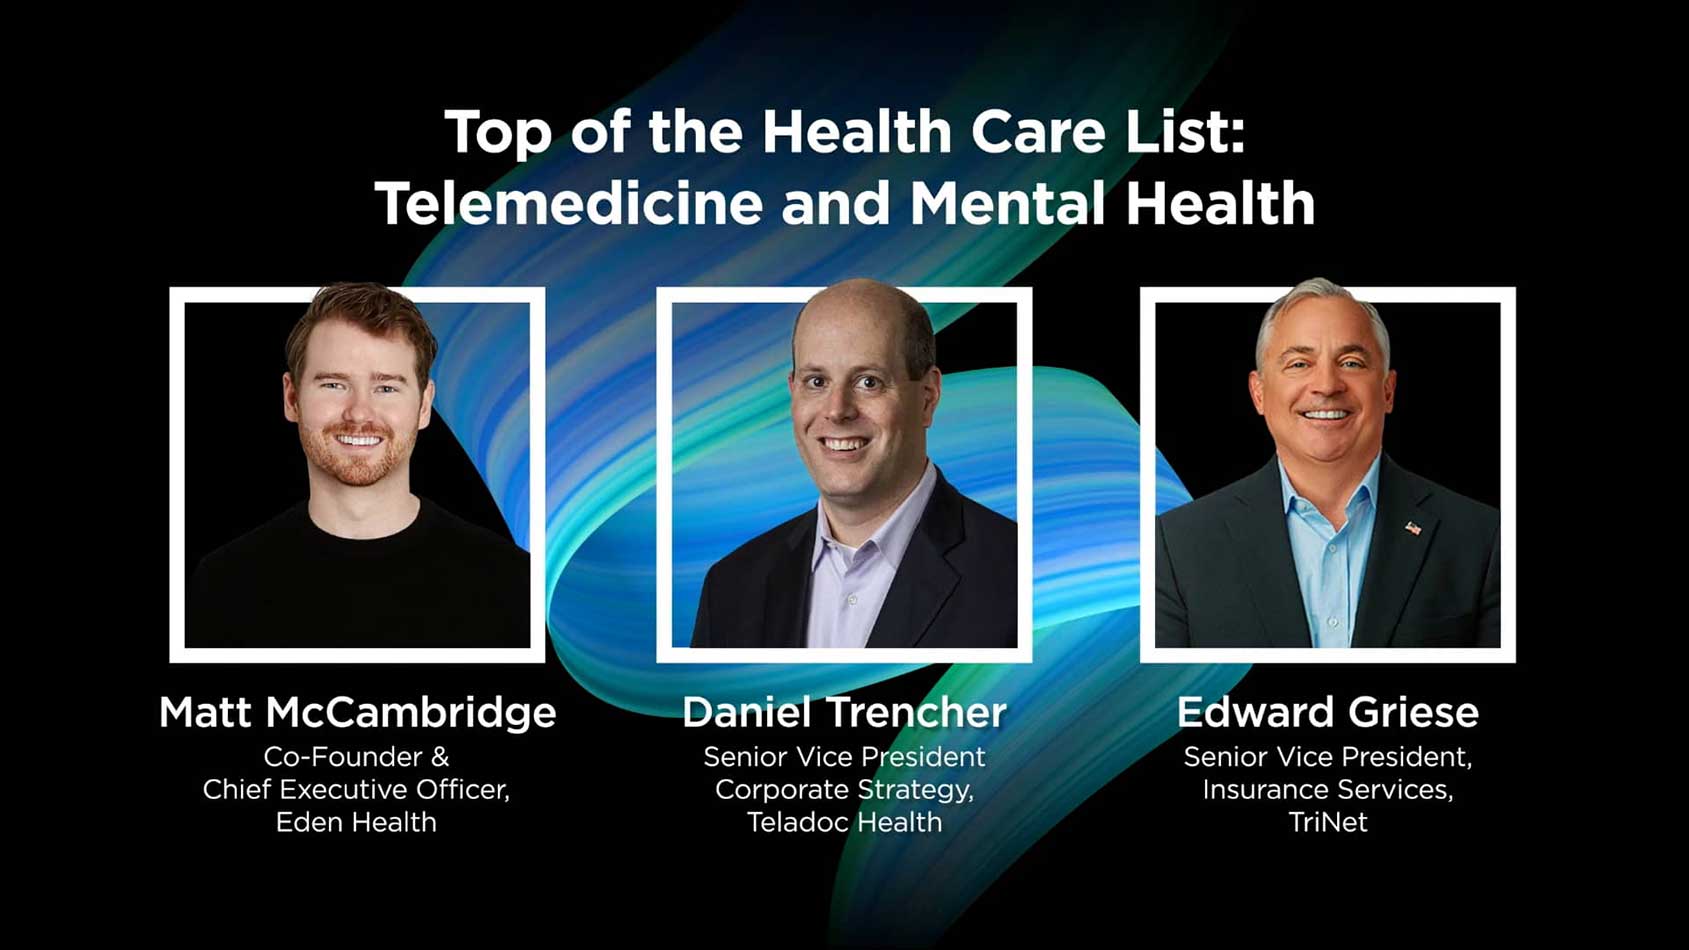 Top of the Health Care List: Telemedicine and Mental Health